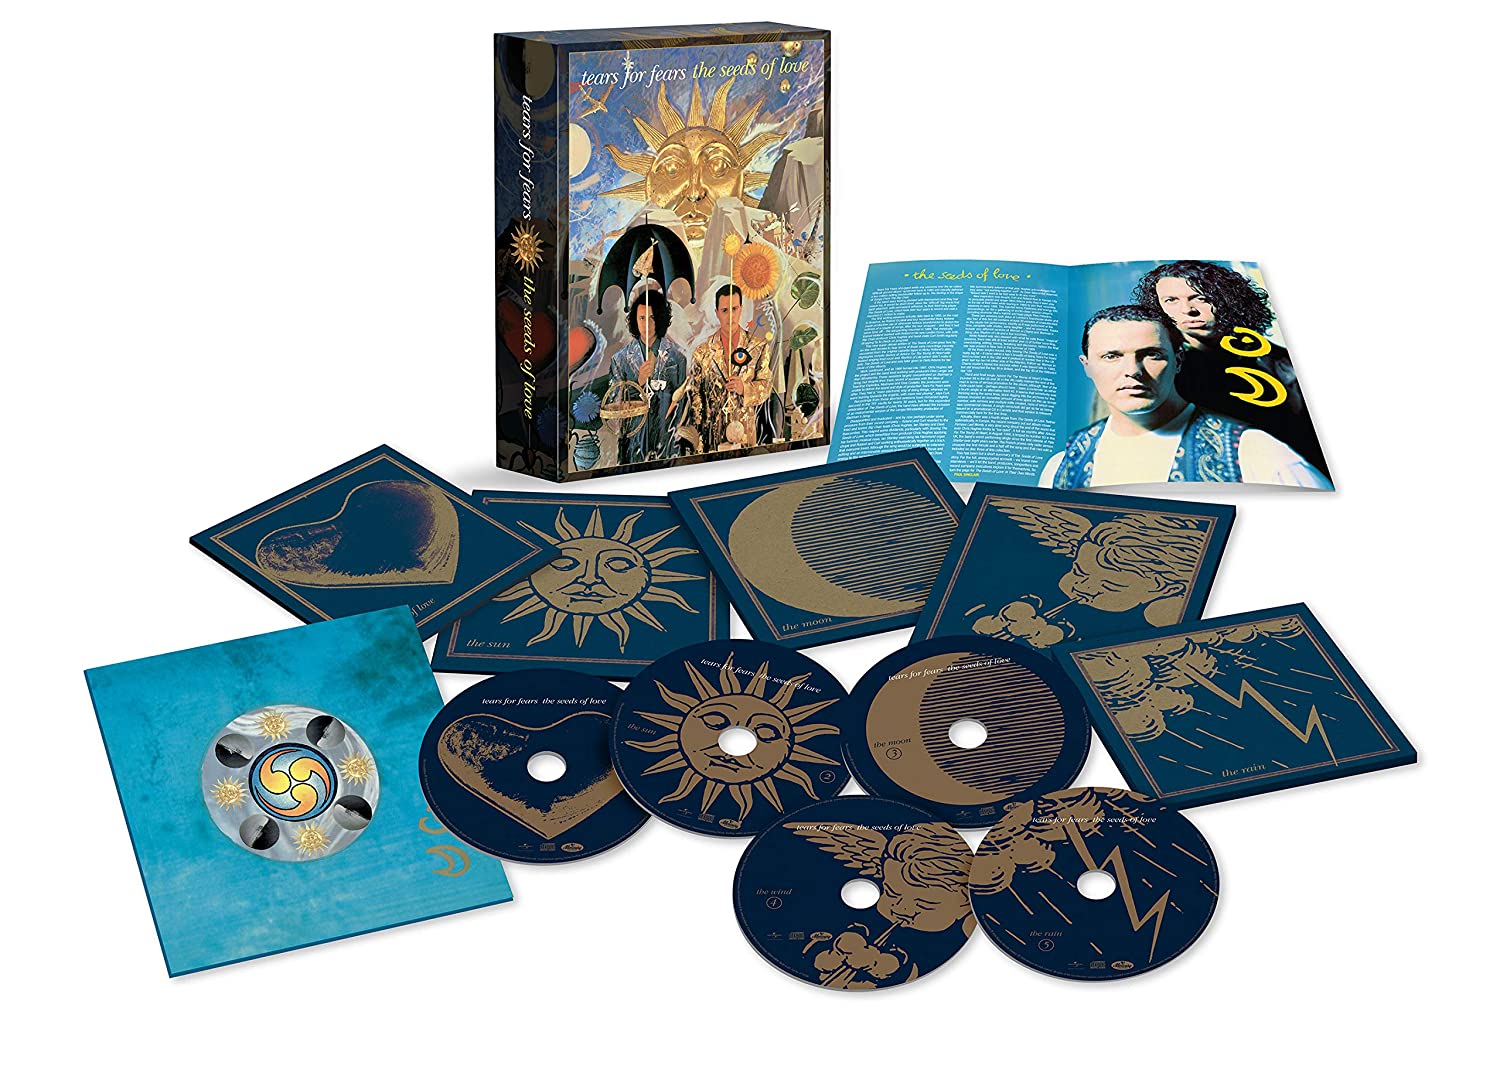 Tears For Fears - Seeds of Love Super Deluxe Box Set